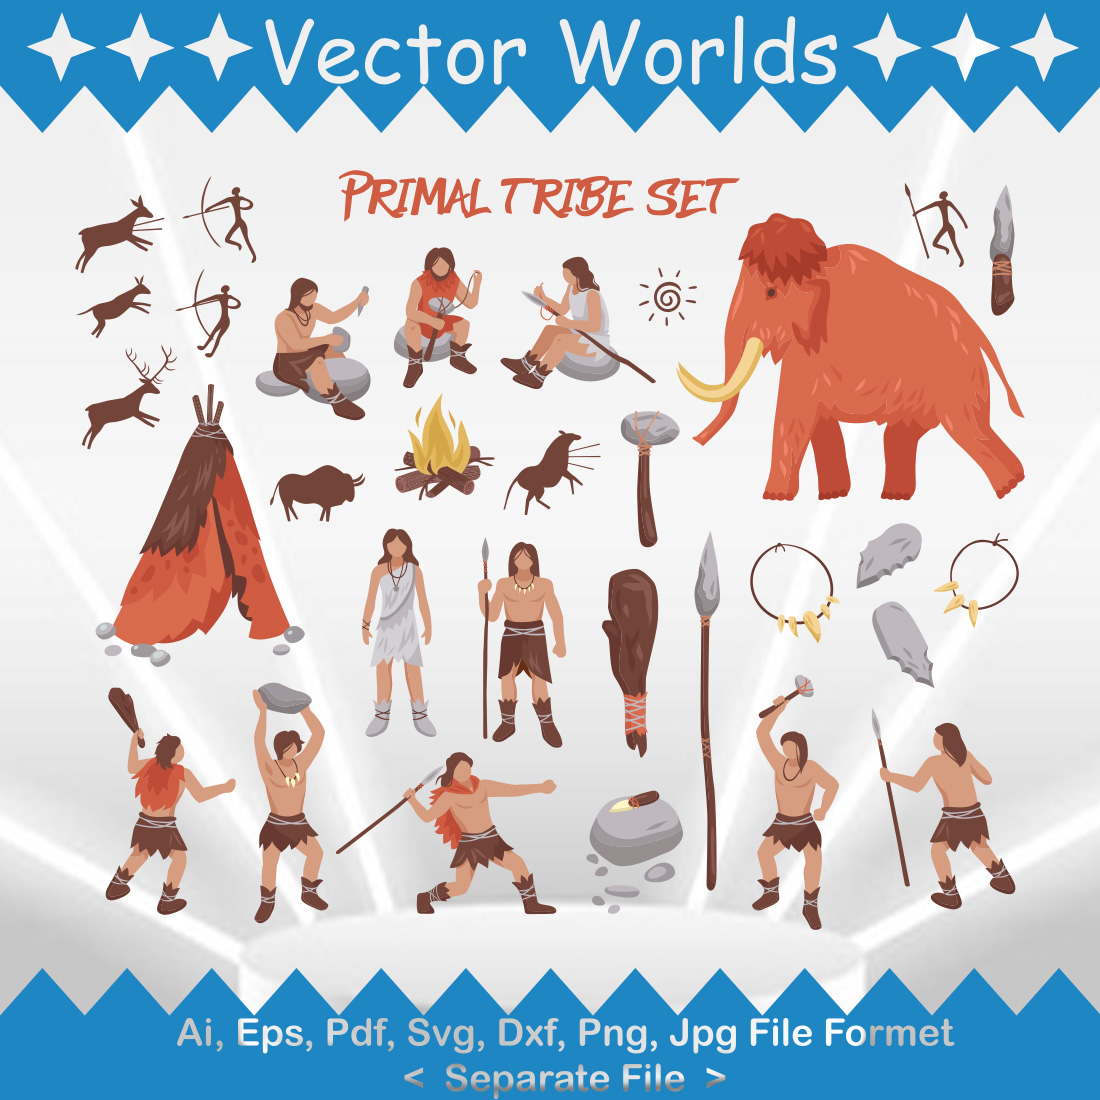 The Great Ice Age SVG Vector Design cover image.